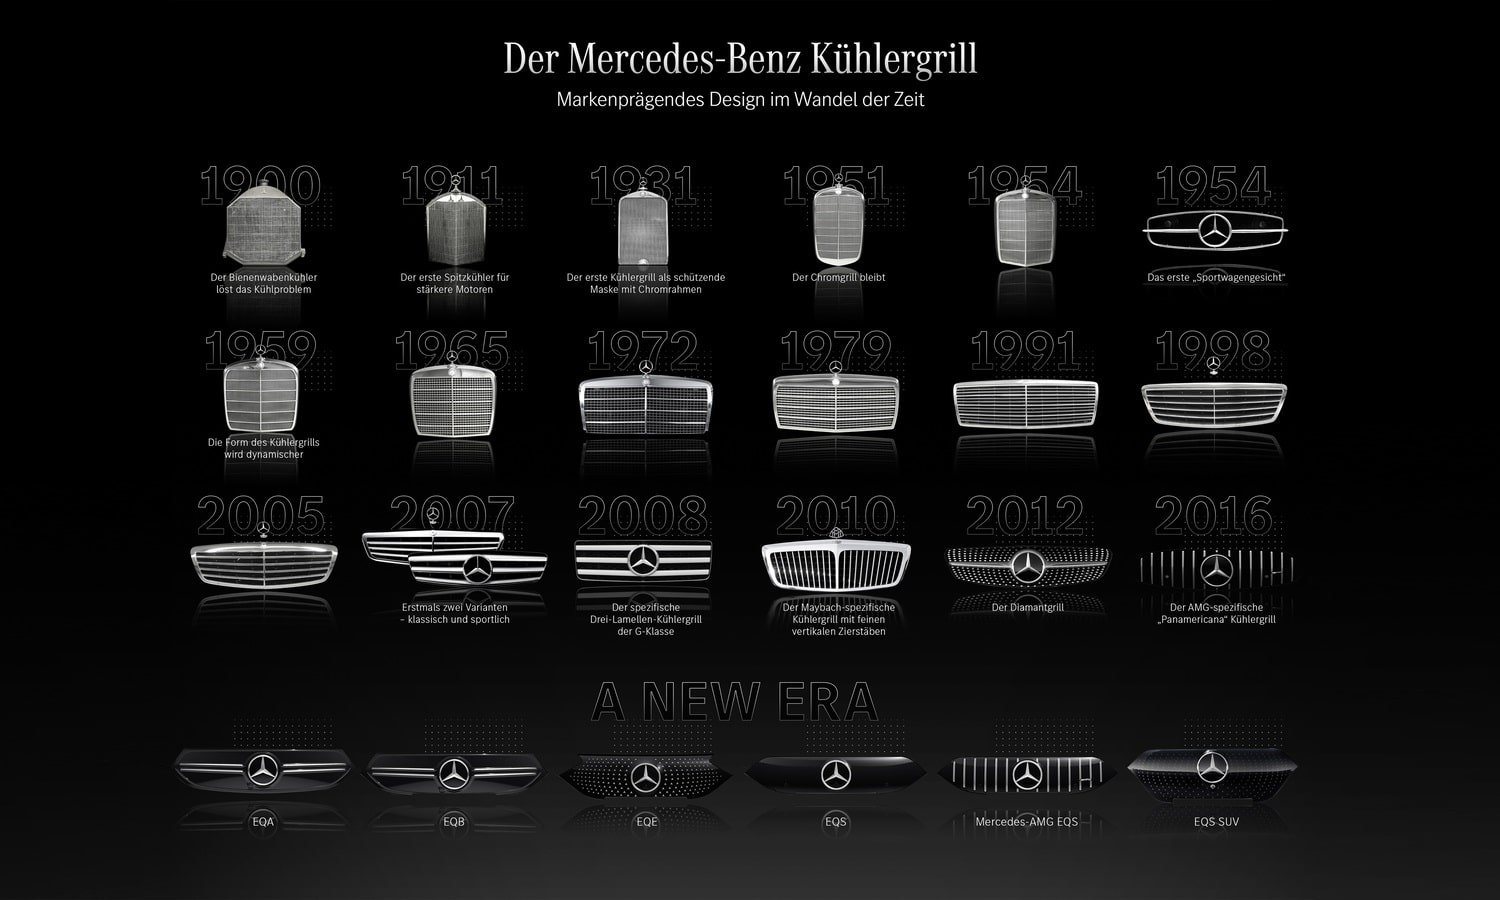 The evolution of the radiator grille - from chrome edged radiator caps to avant-garde artefacts and sensor hubs